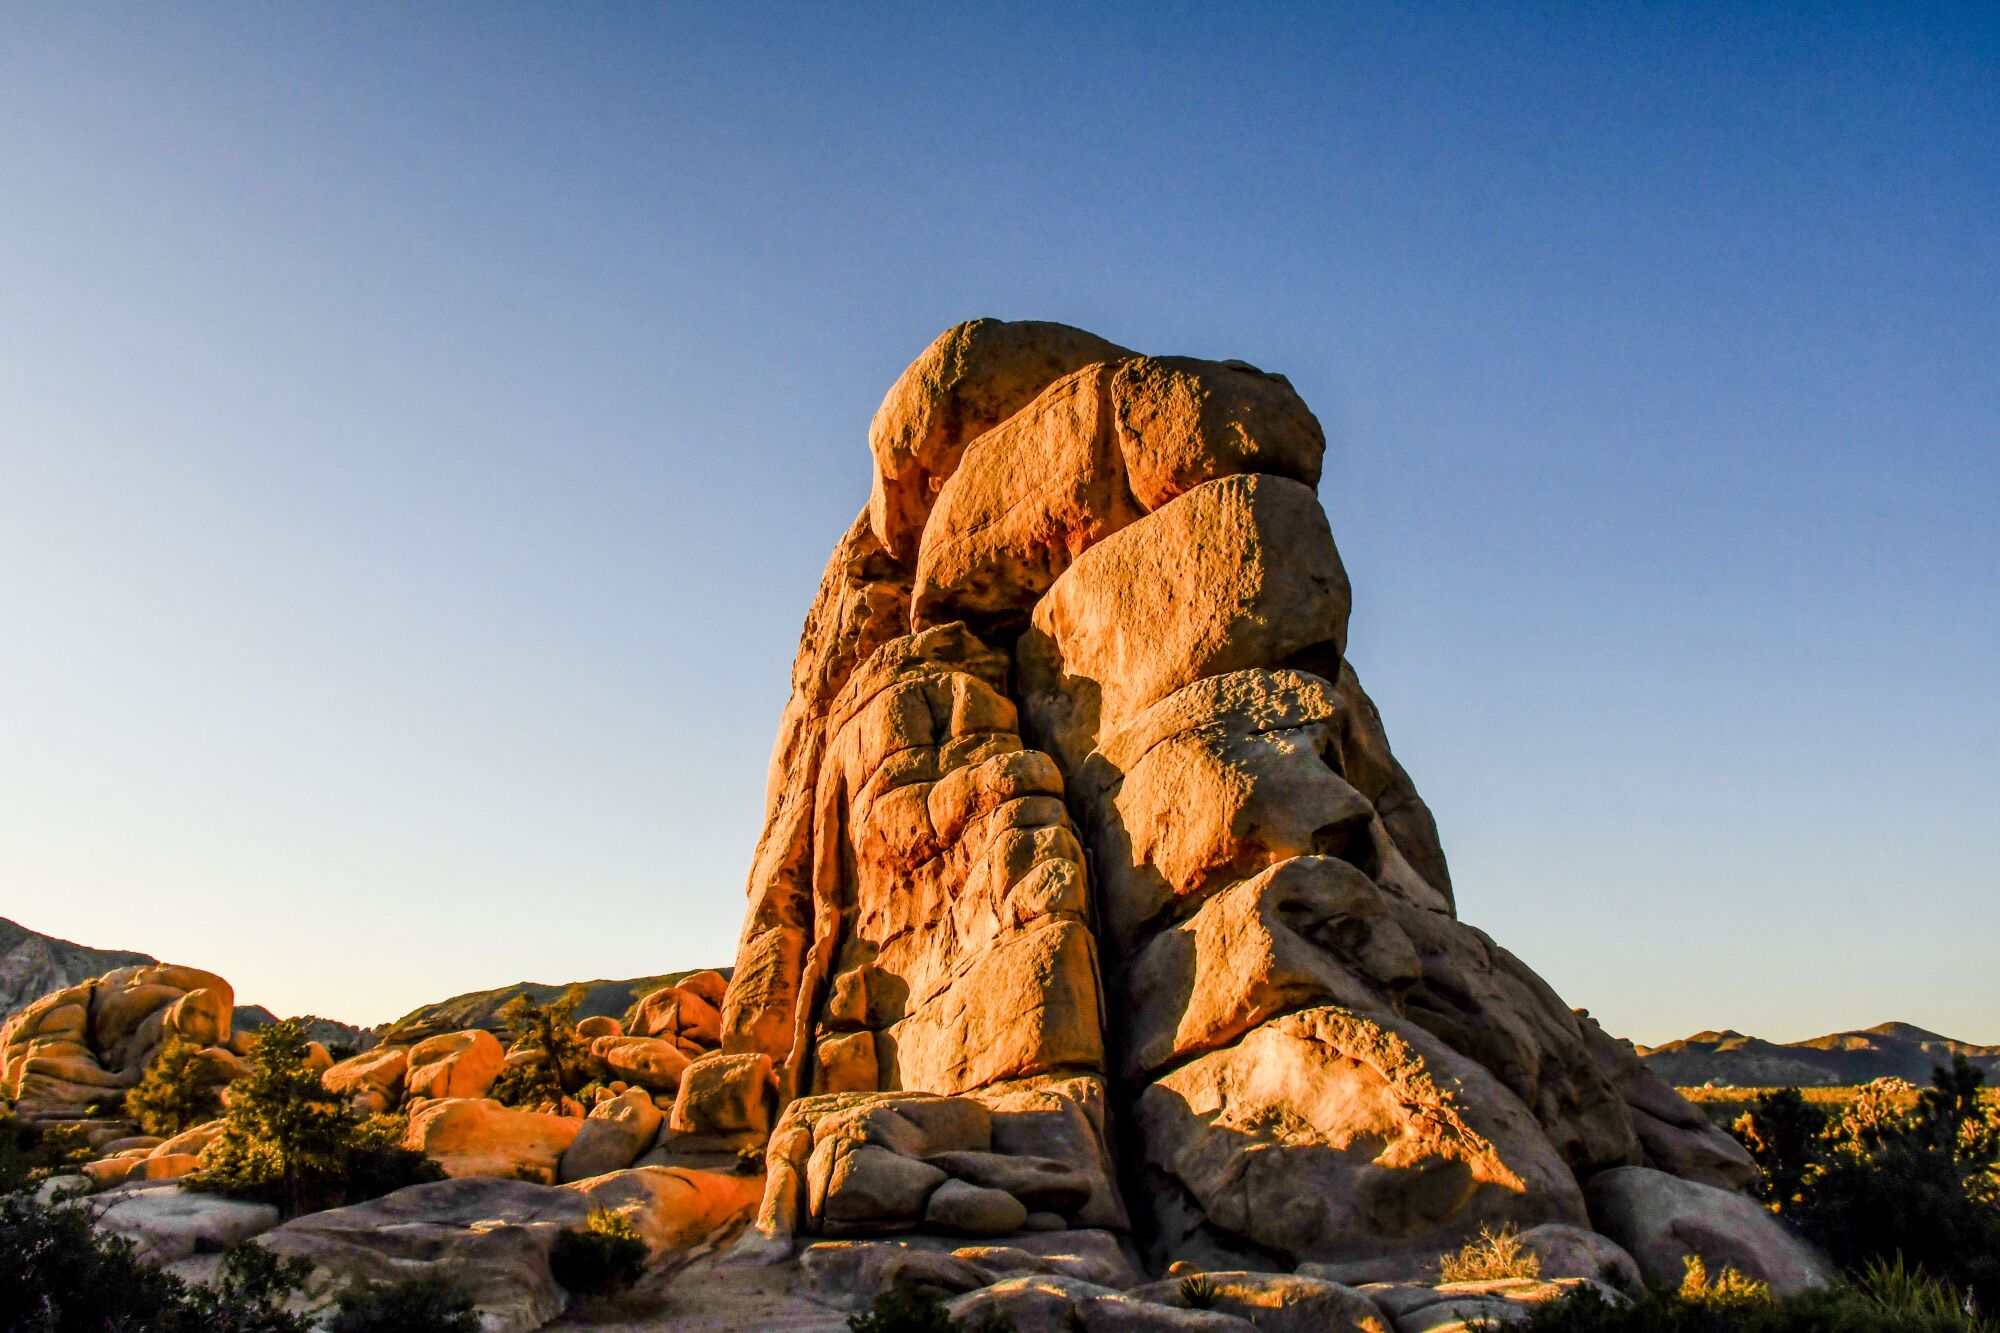 Reddish boulders stand out against a blue sky.
